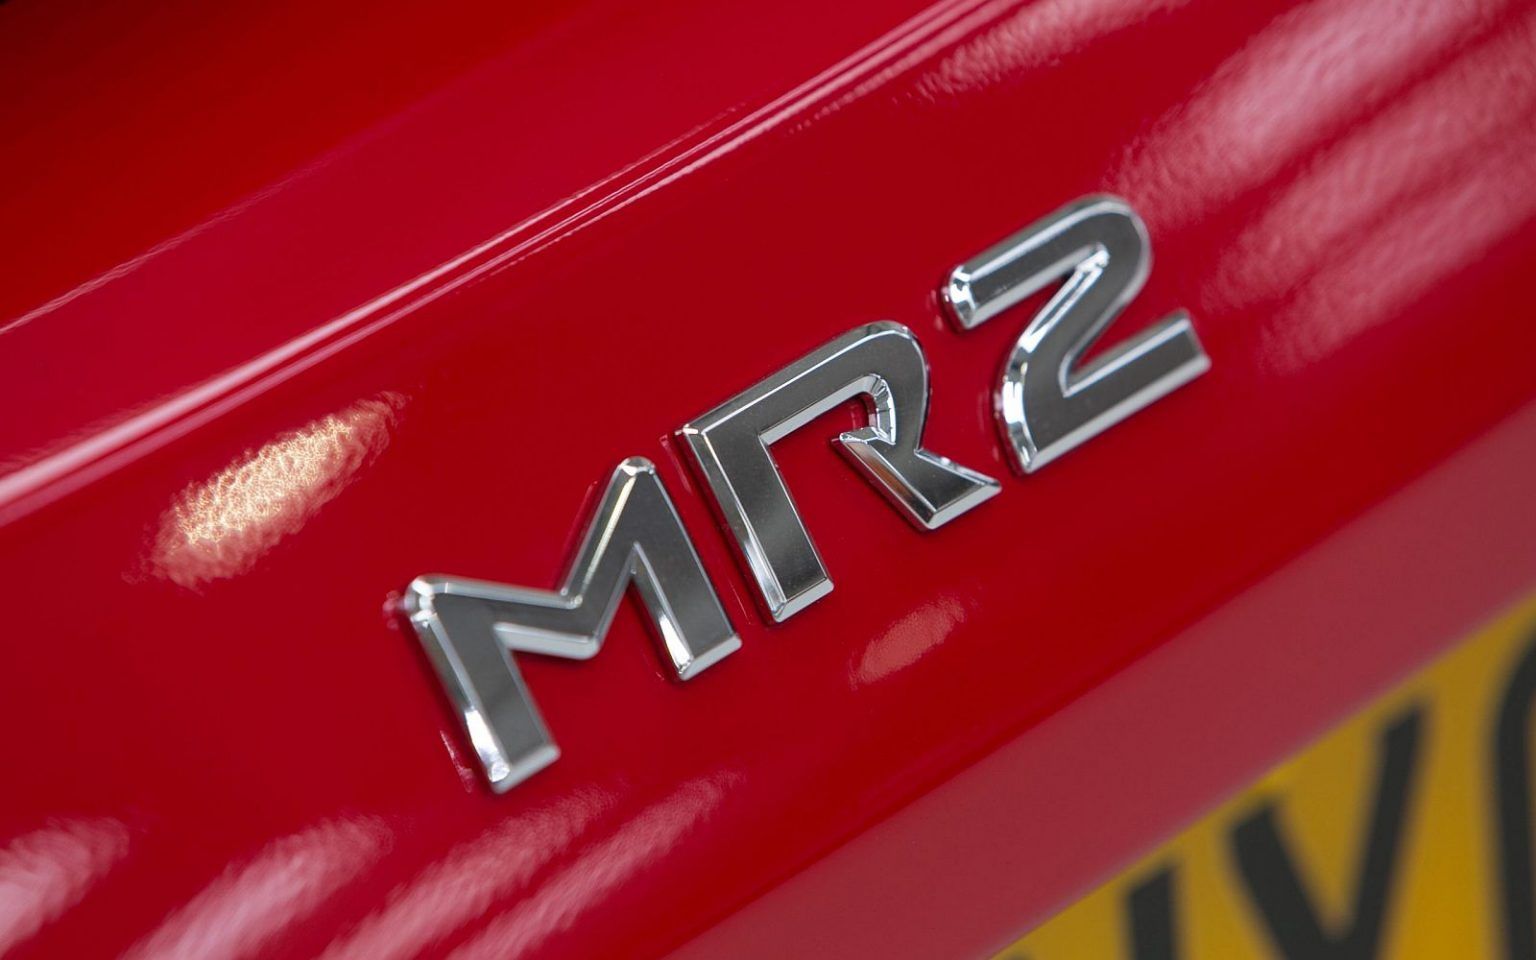 The badging of the 1991 Toyota MR2.